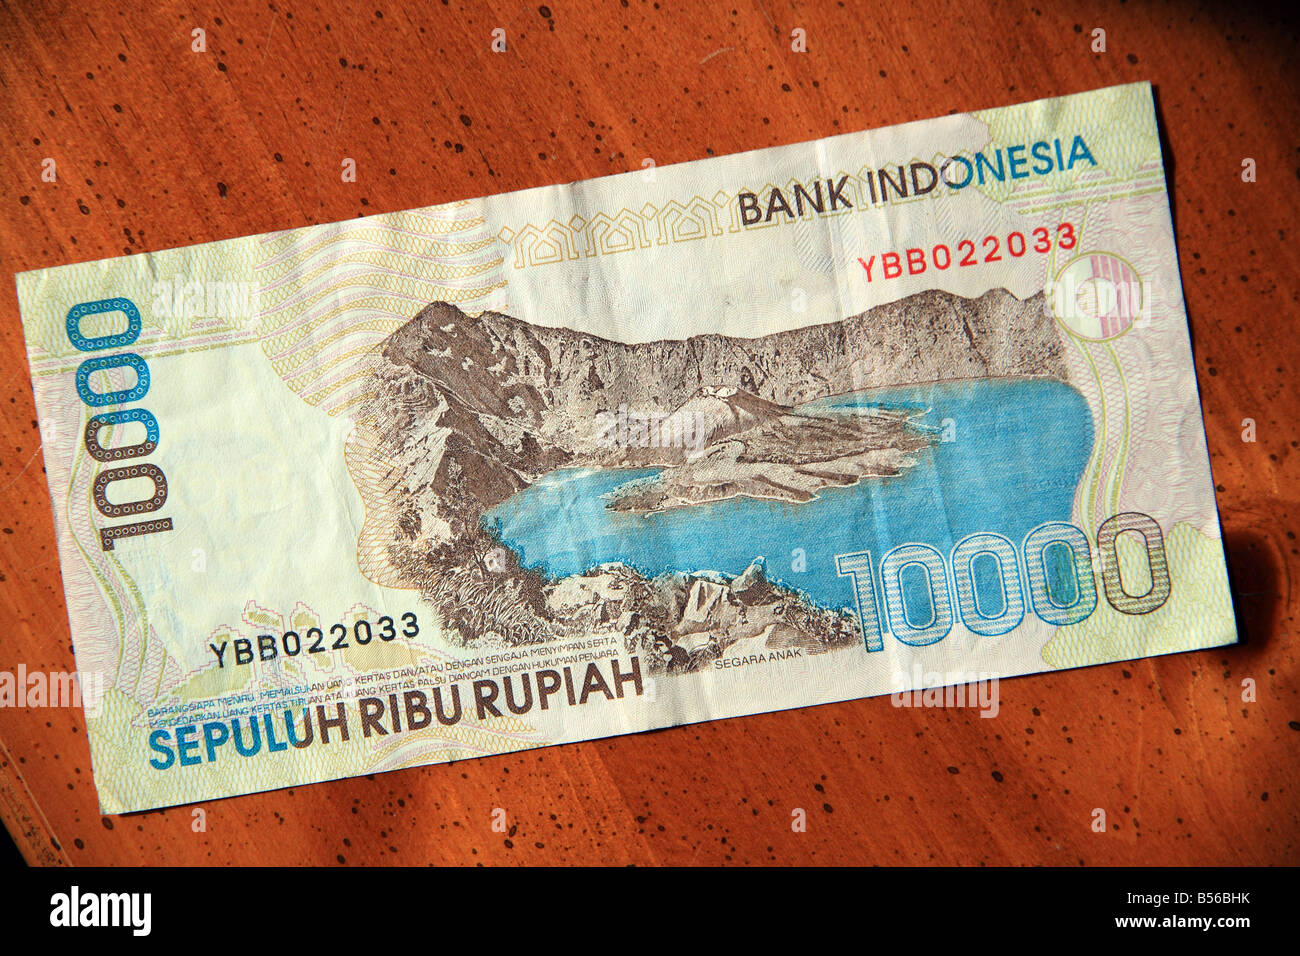 Indonesia 10000 Rupiah currency note on table Stock Photo